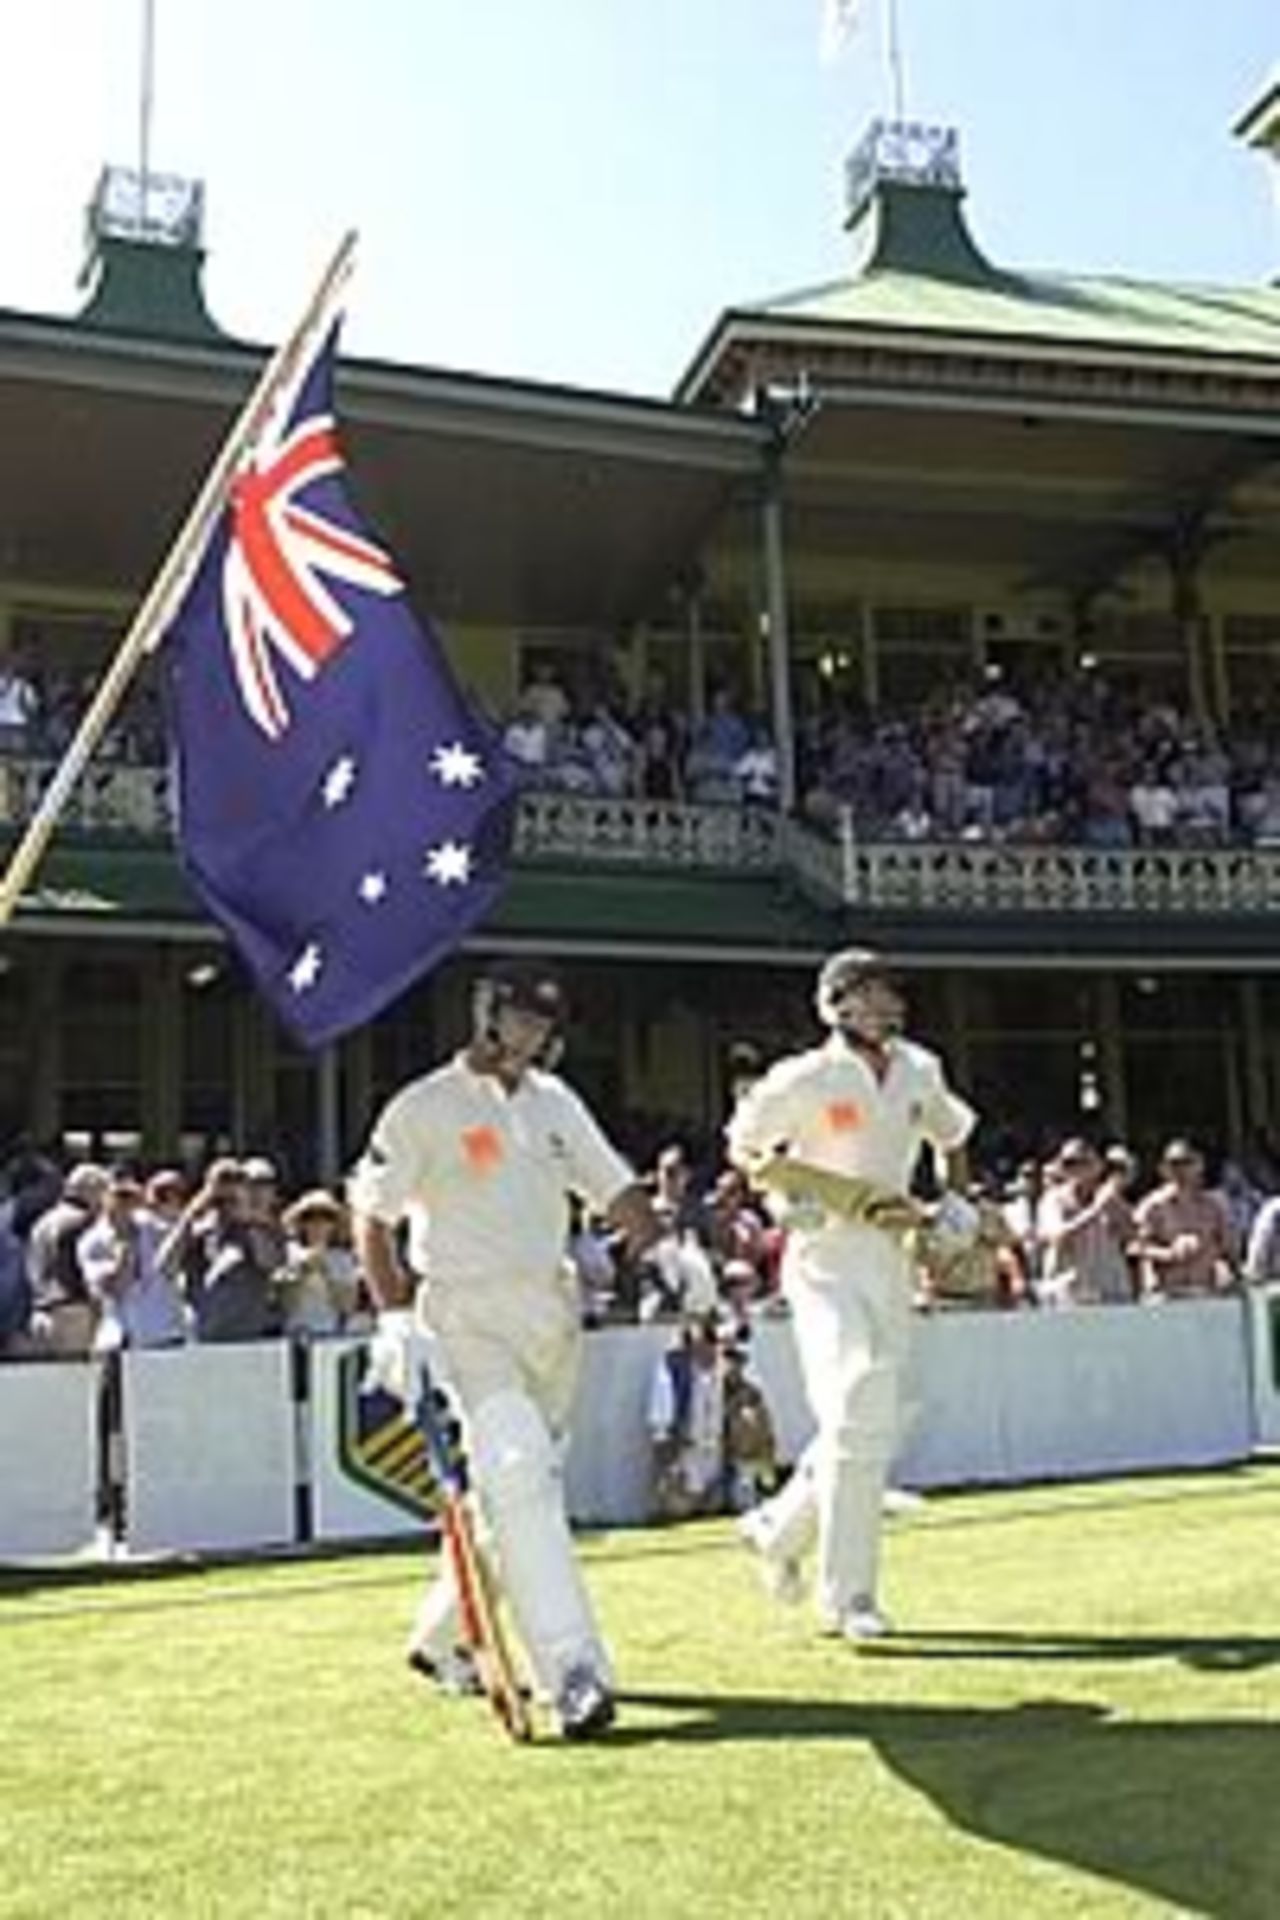 SYDNEY - JANUARY 3: Steve Waugh of Australia enters the field during the second day of the fifth Ashes test between Australia and England at the Sydney Cricket Ground in Sydney, Australia on January 3, 2003.